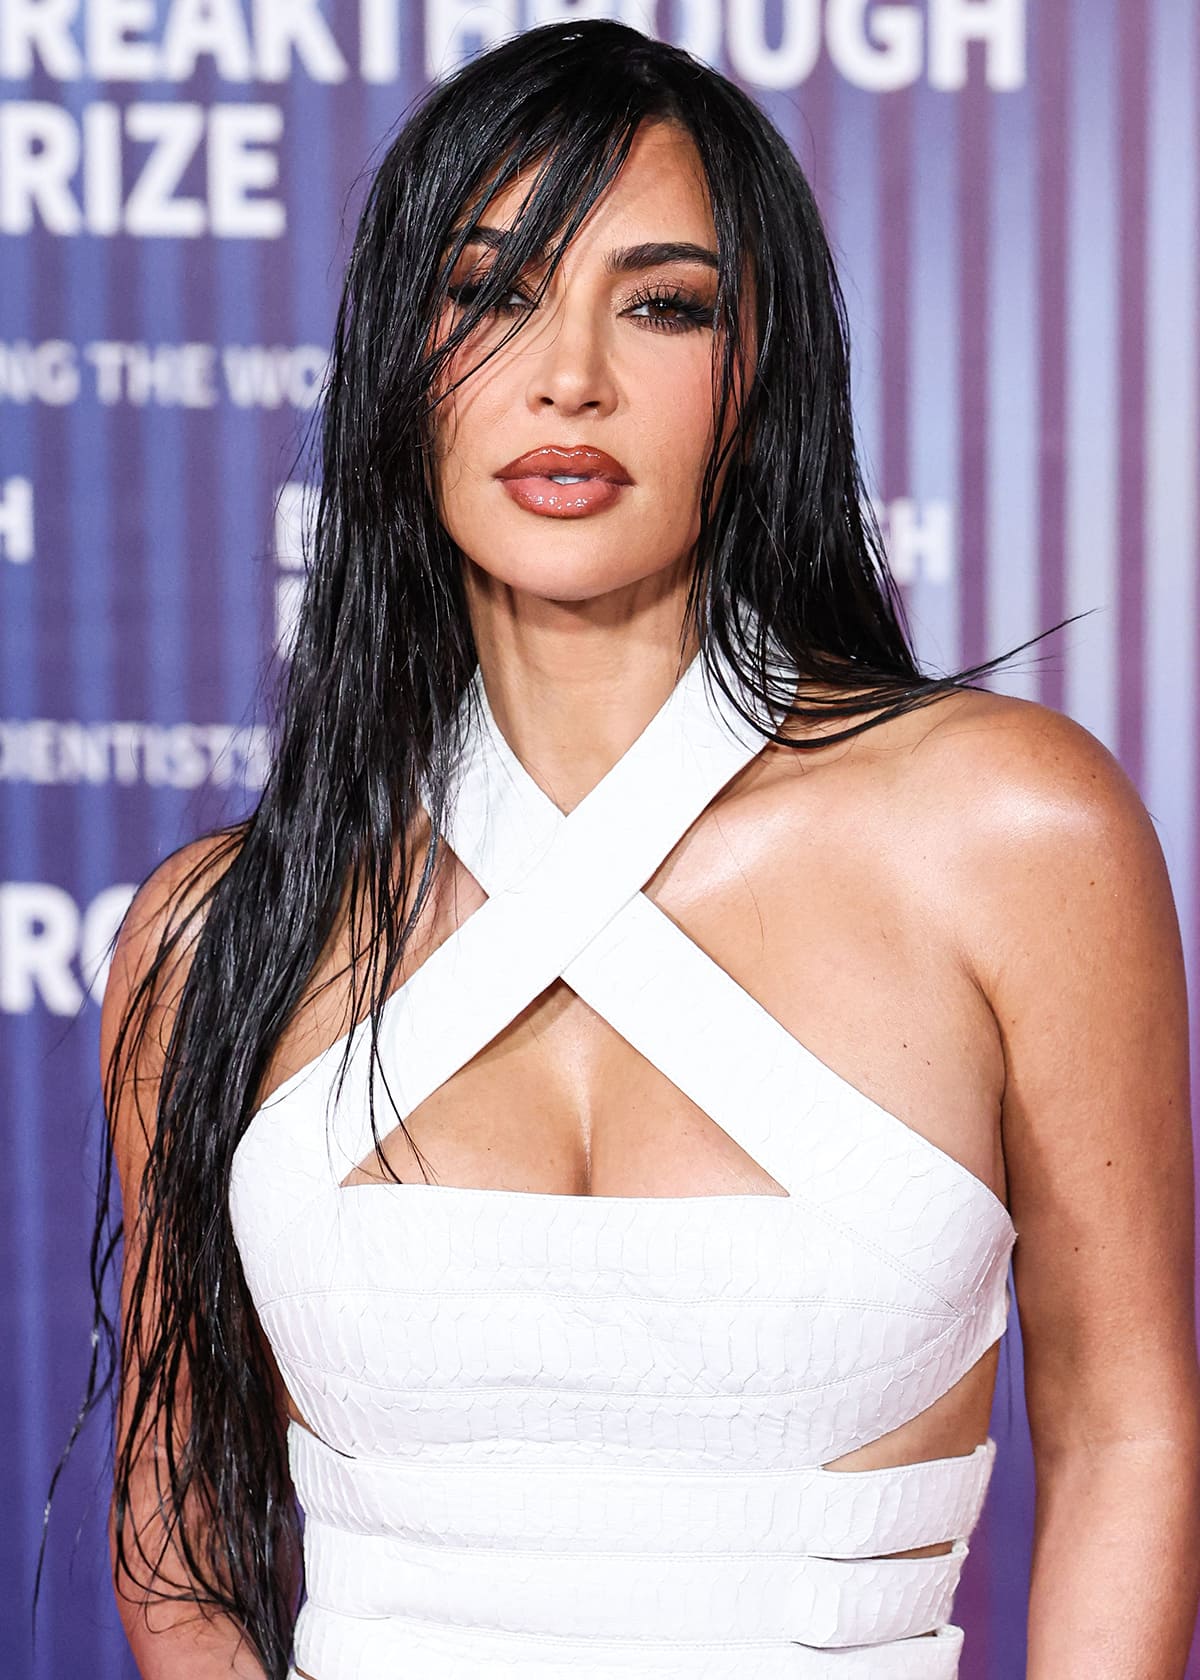 Kim Kardashian continues her look's sultry vibe by wearing a wet-look hairstyle and accentuating her striking features with bronze smokey eyeshadow and two-tone nude-brown lip gloss